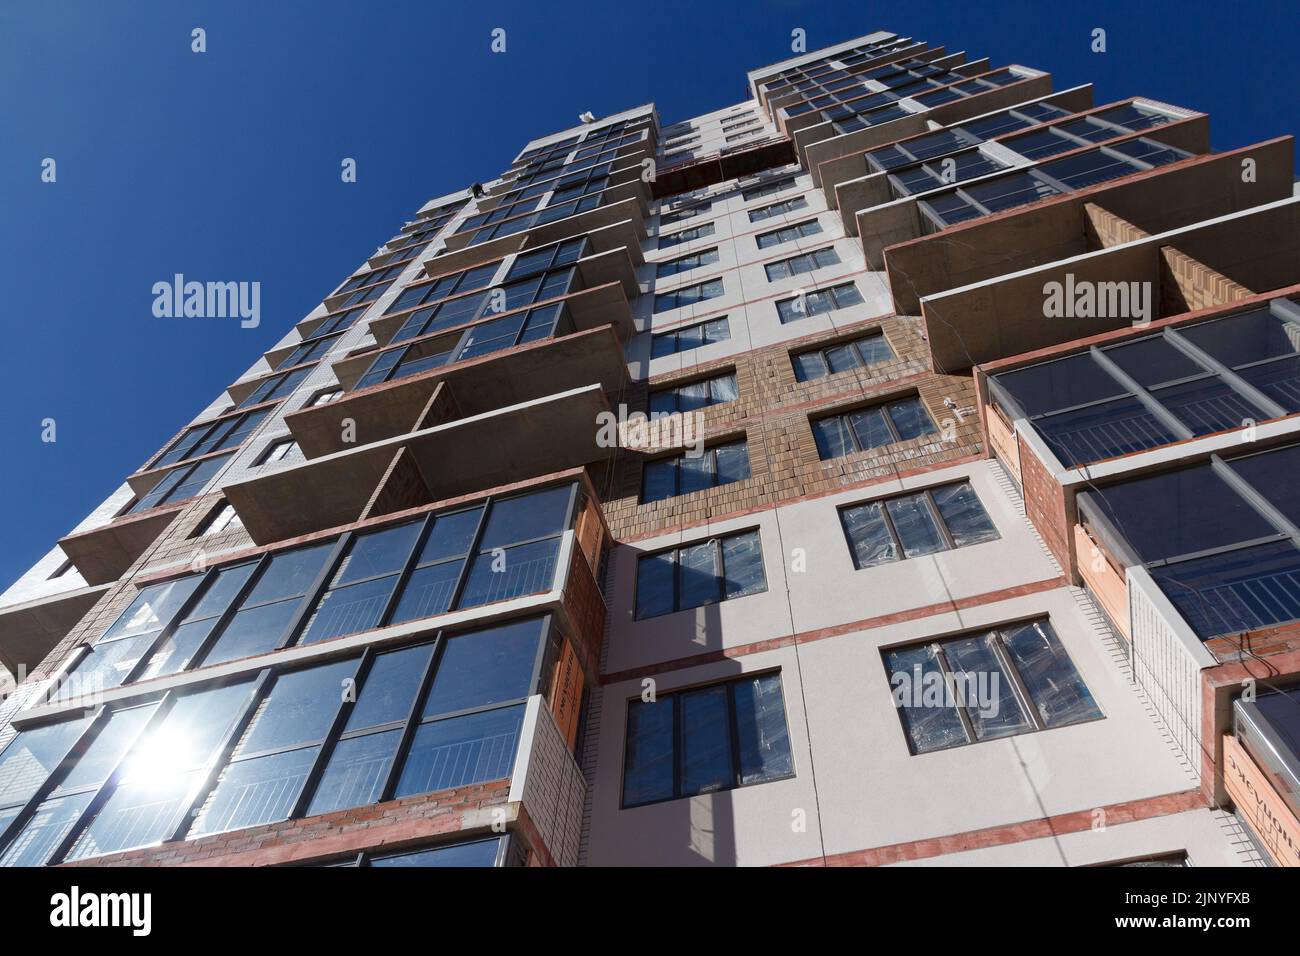 Construction of a residential building. Part of urban real estate and architecture. Facade of a residential building. Stock Photo